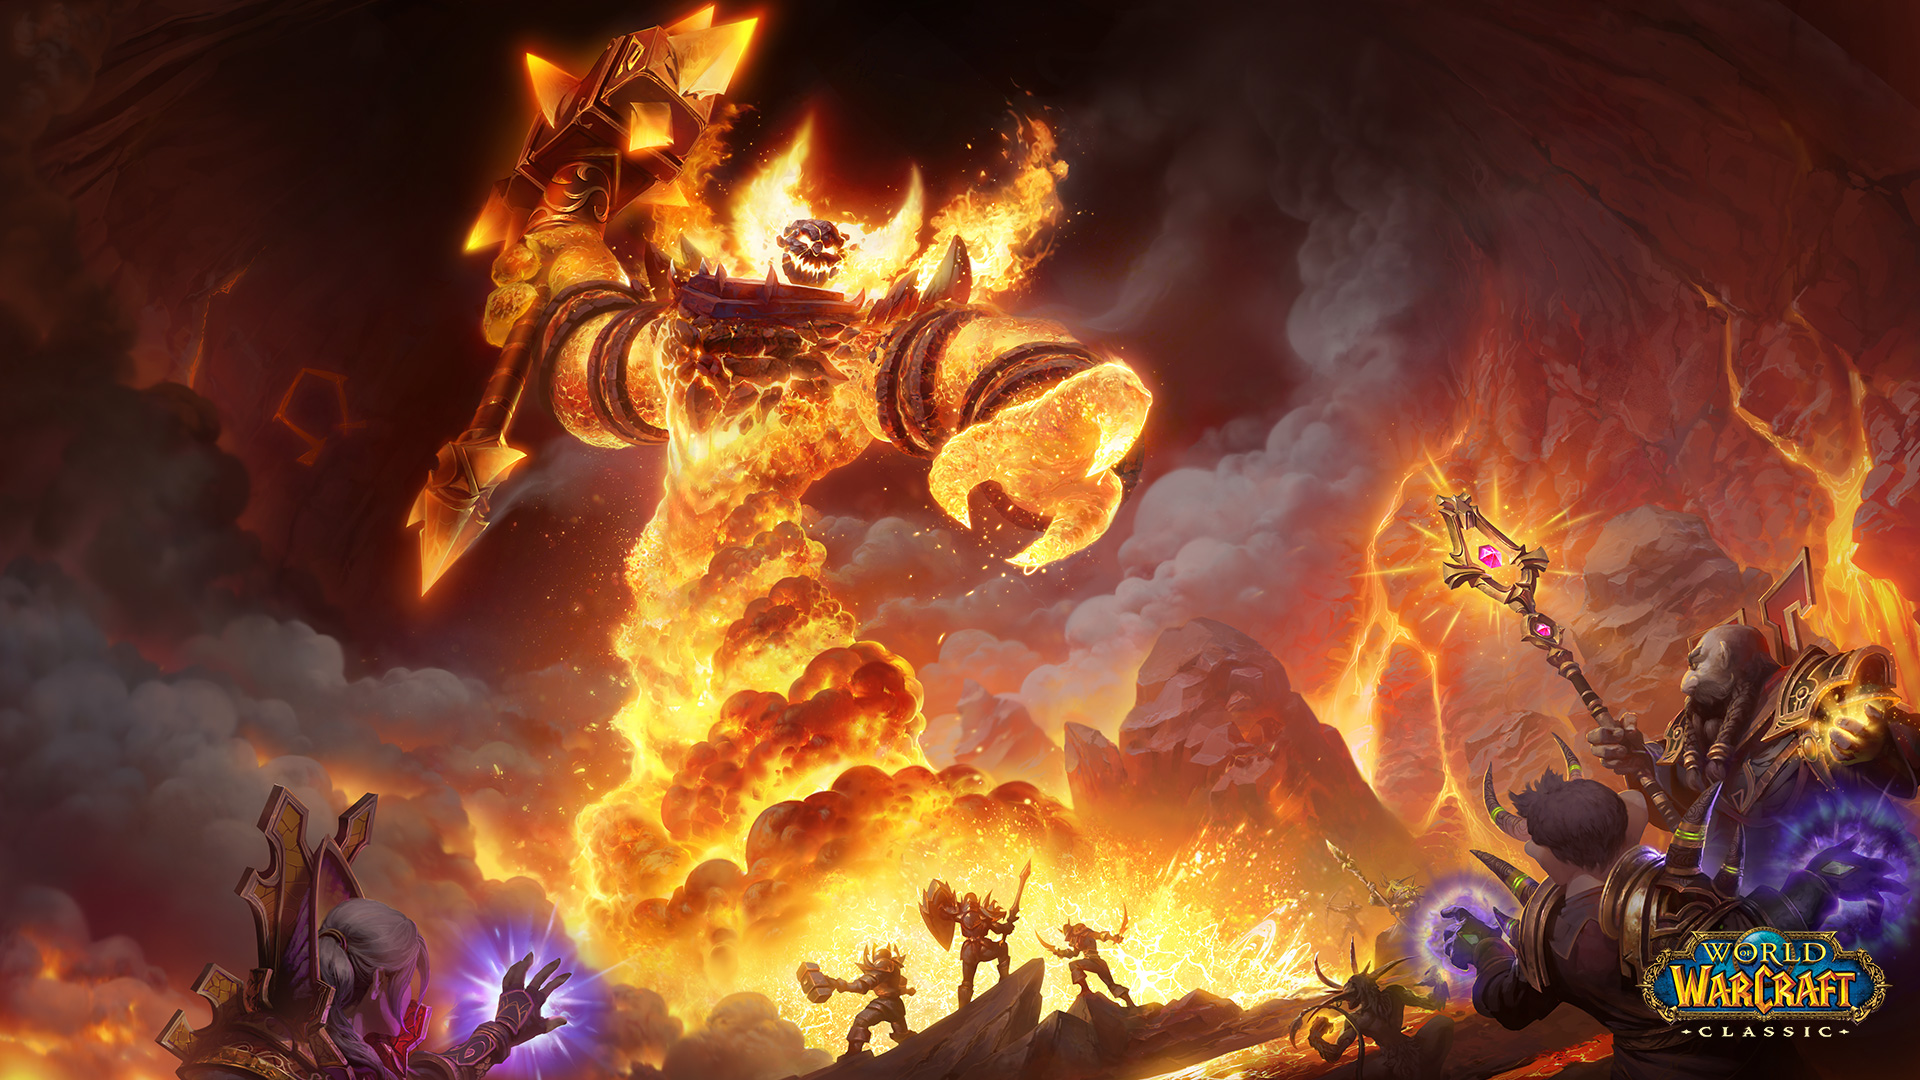 World Of Warcraft Cataclysm World Of Warcraft Battle For Azeroth PC Gaming World Of Warcraft 1920x1080